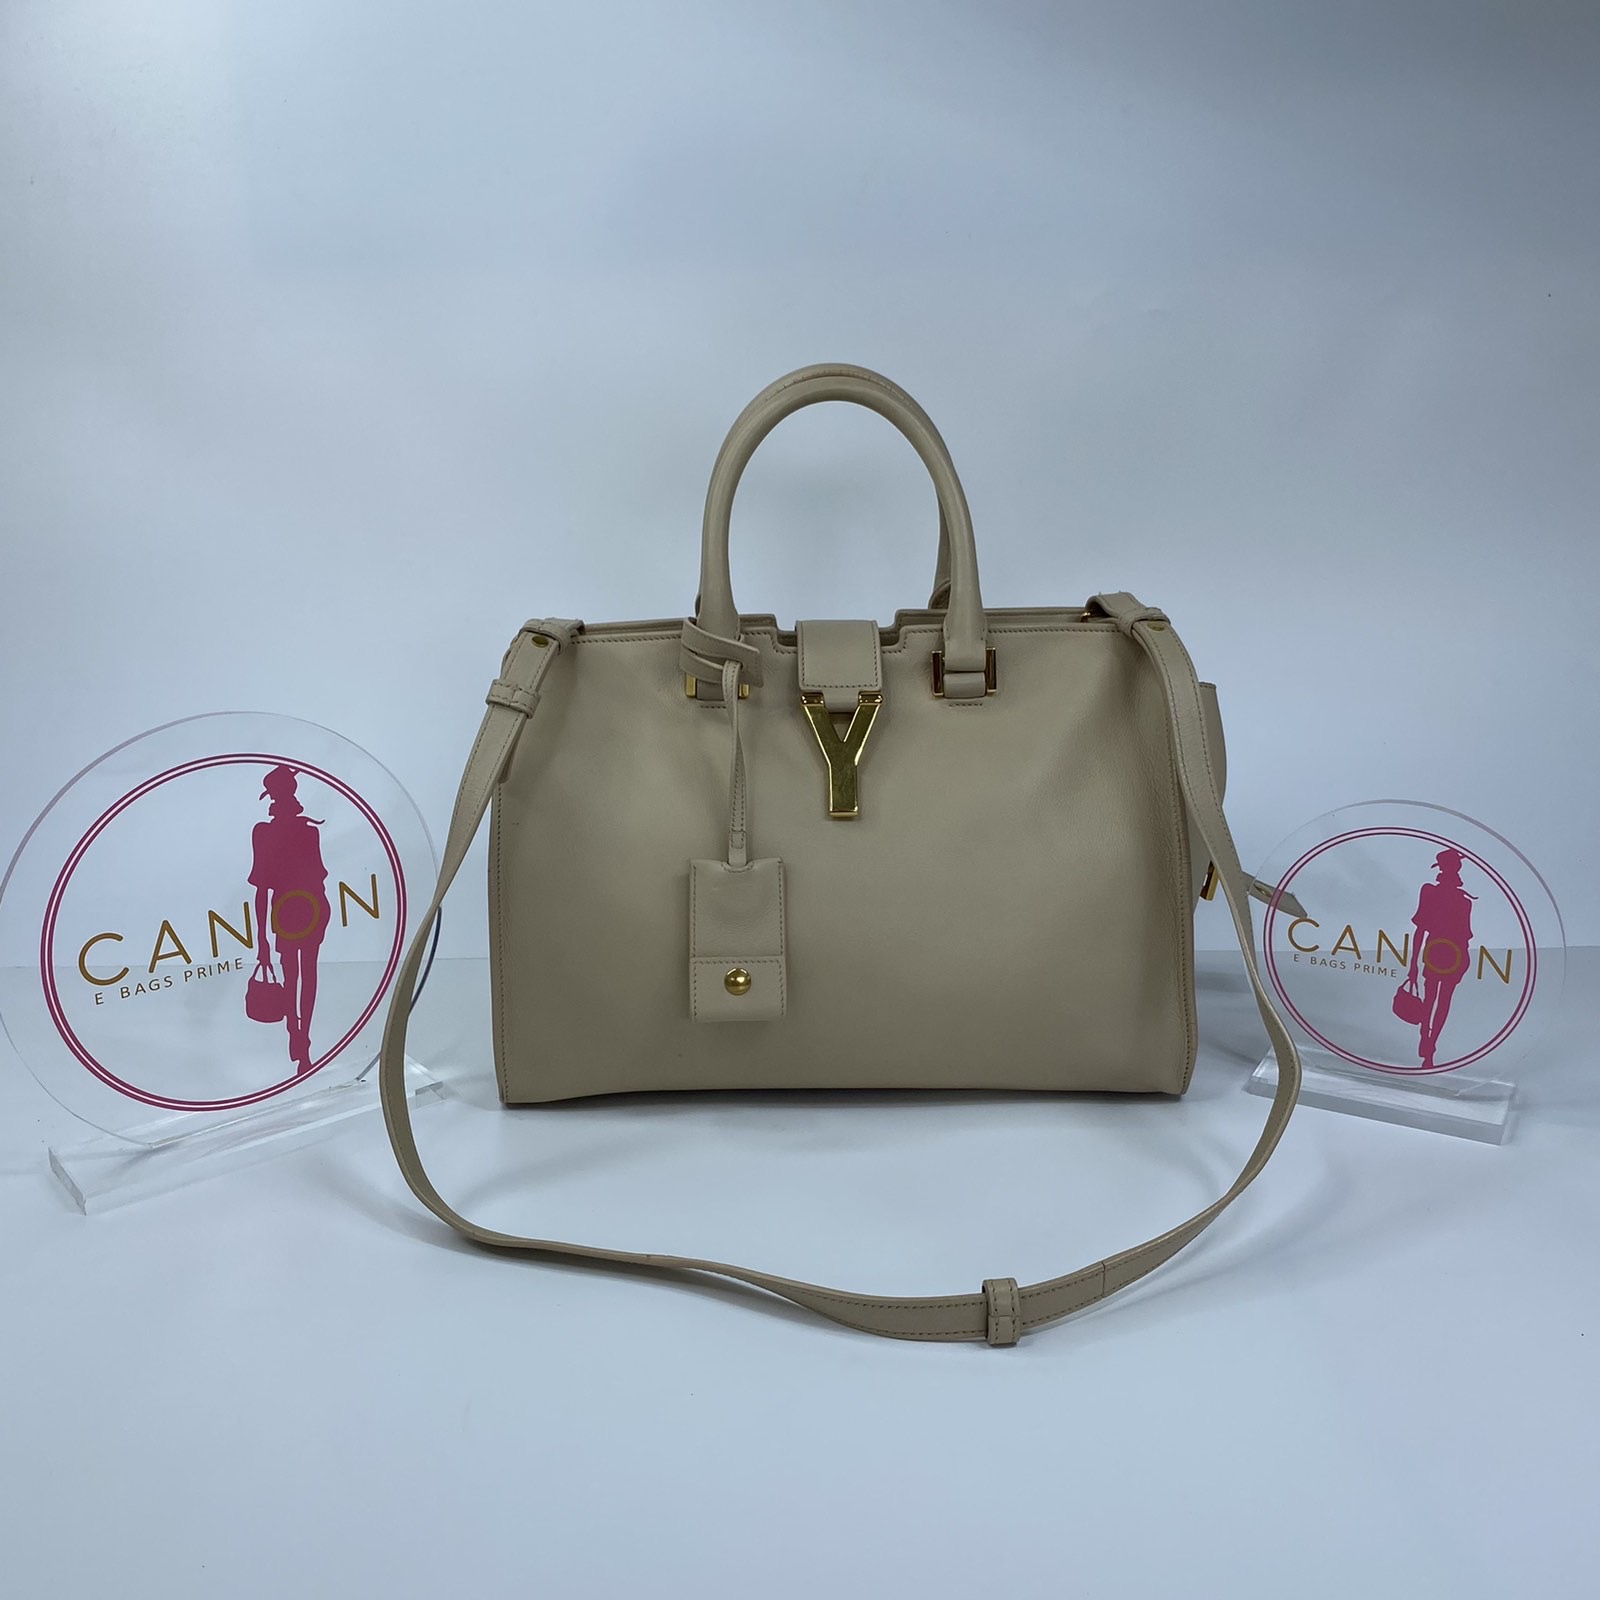 YSL Chyc Cabas Small Beige leather two way bag. Made in Italy